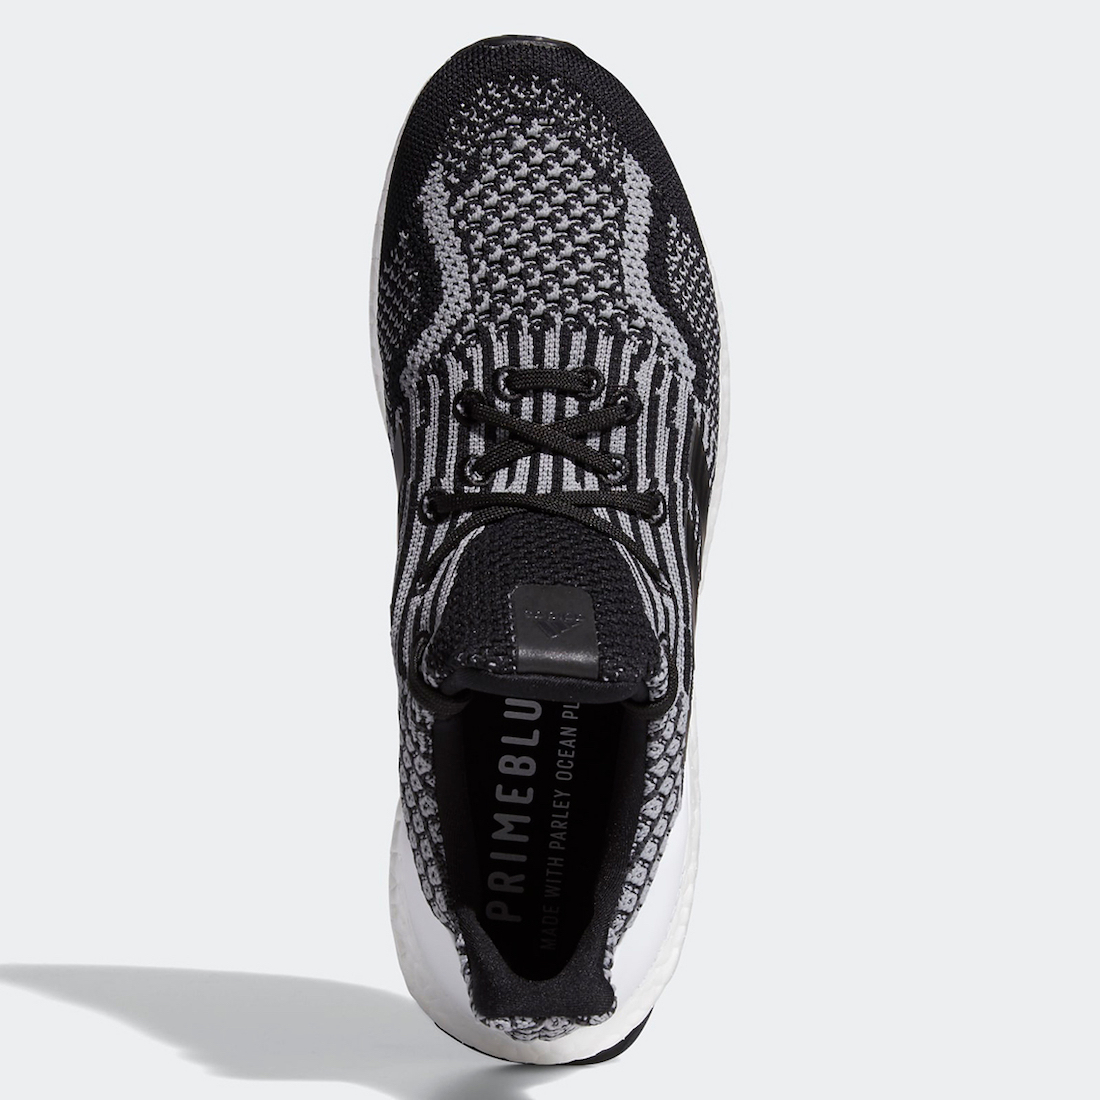 adidas Ultra Boost 5.0 Uncaged DNA Oreo G55367 Release Date